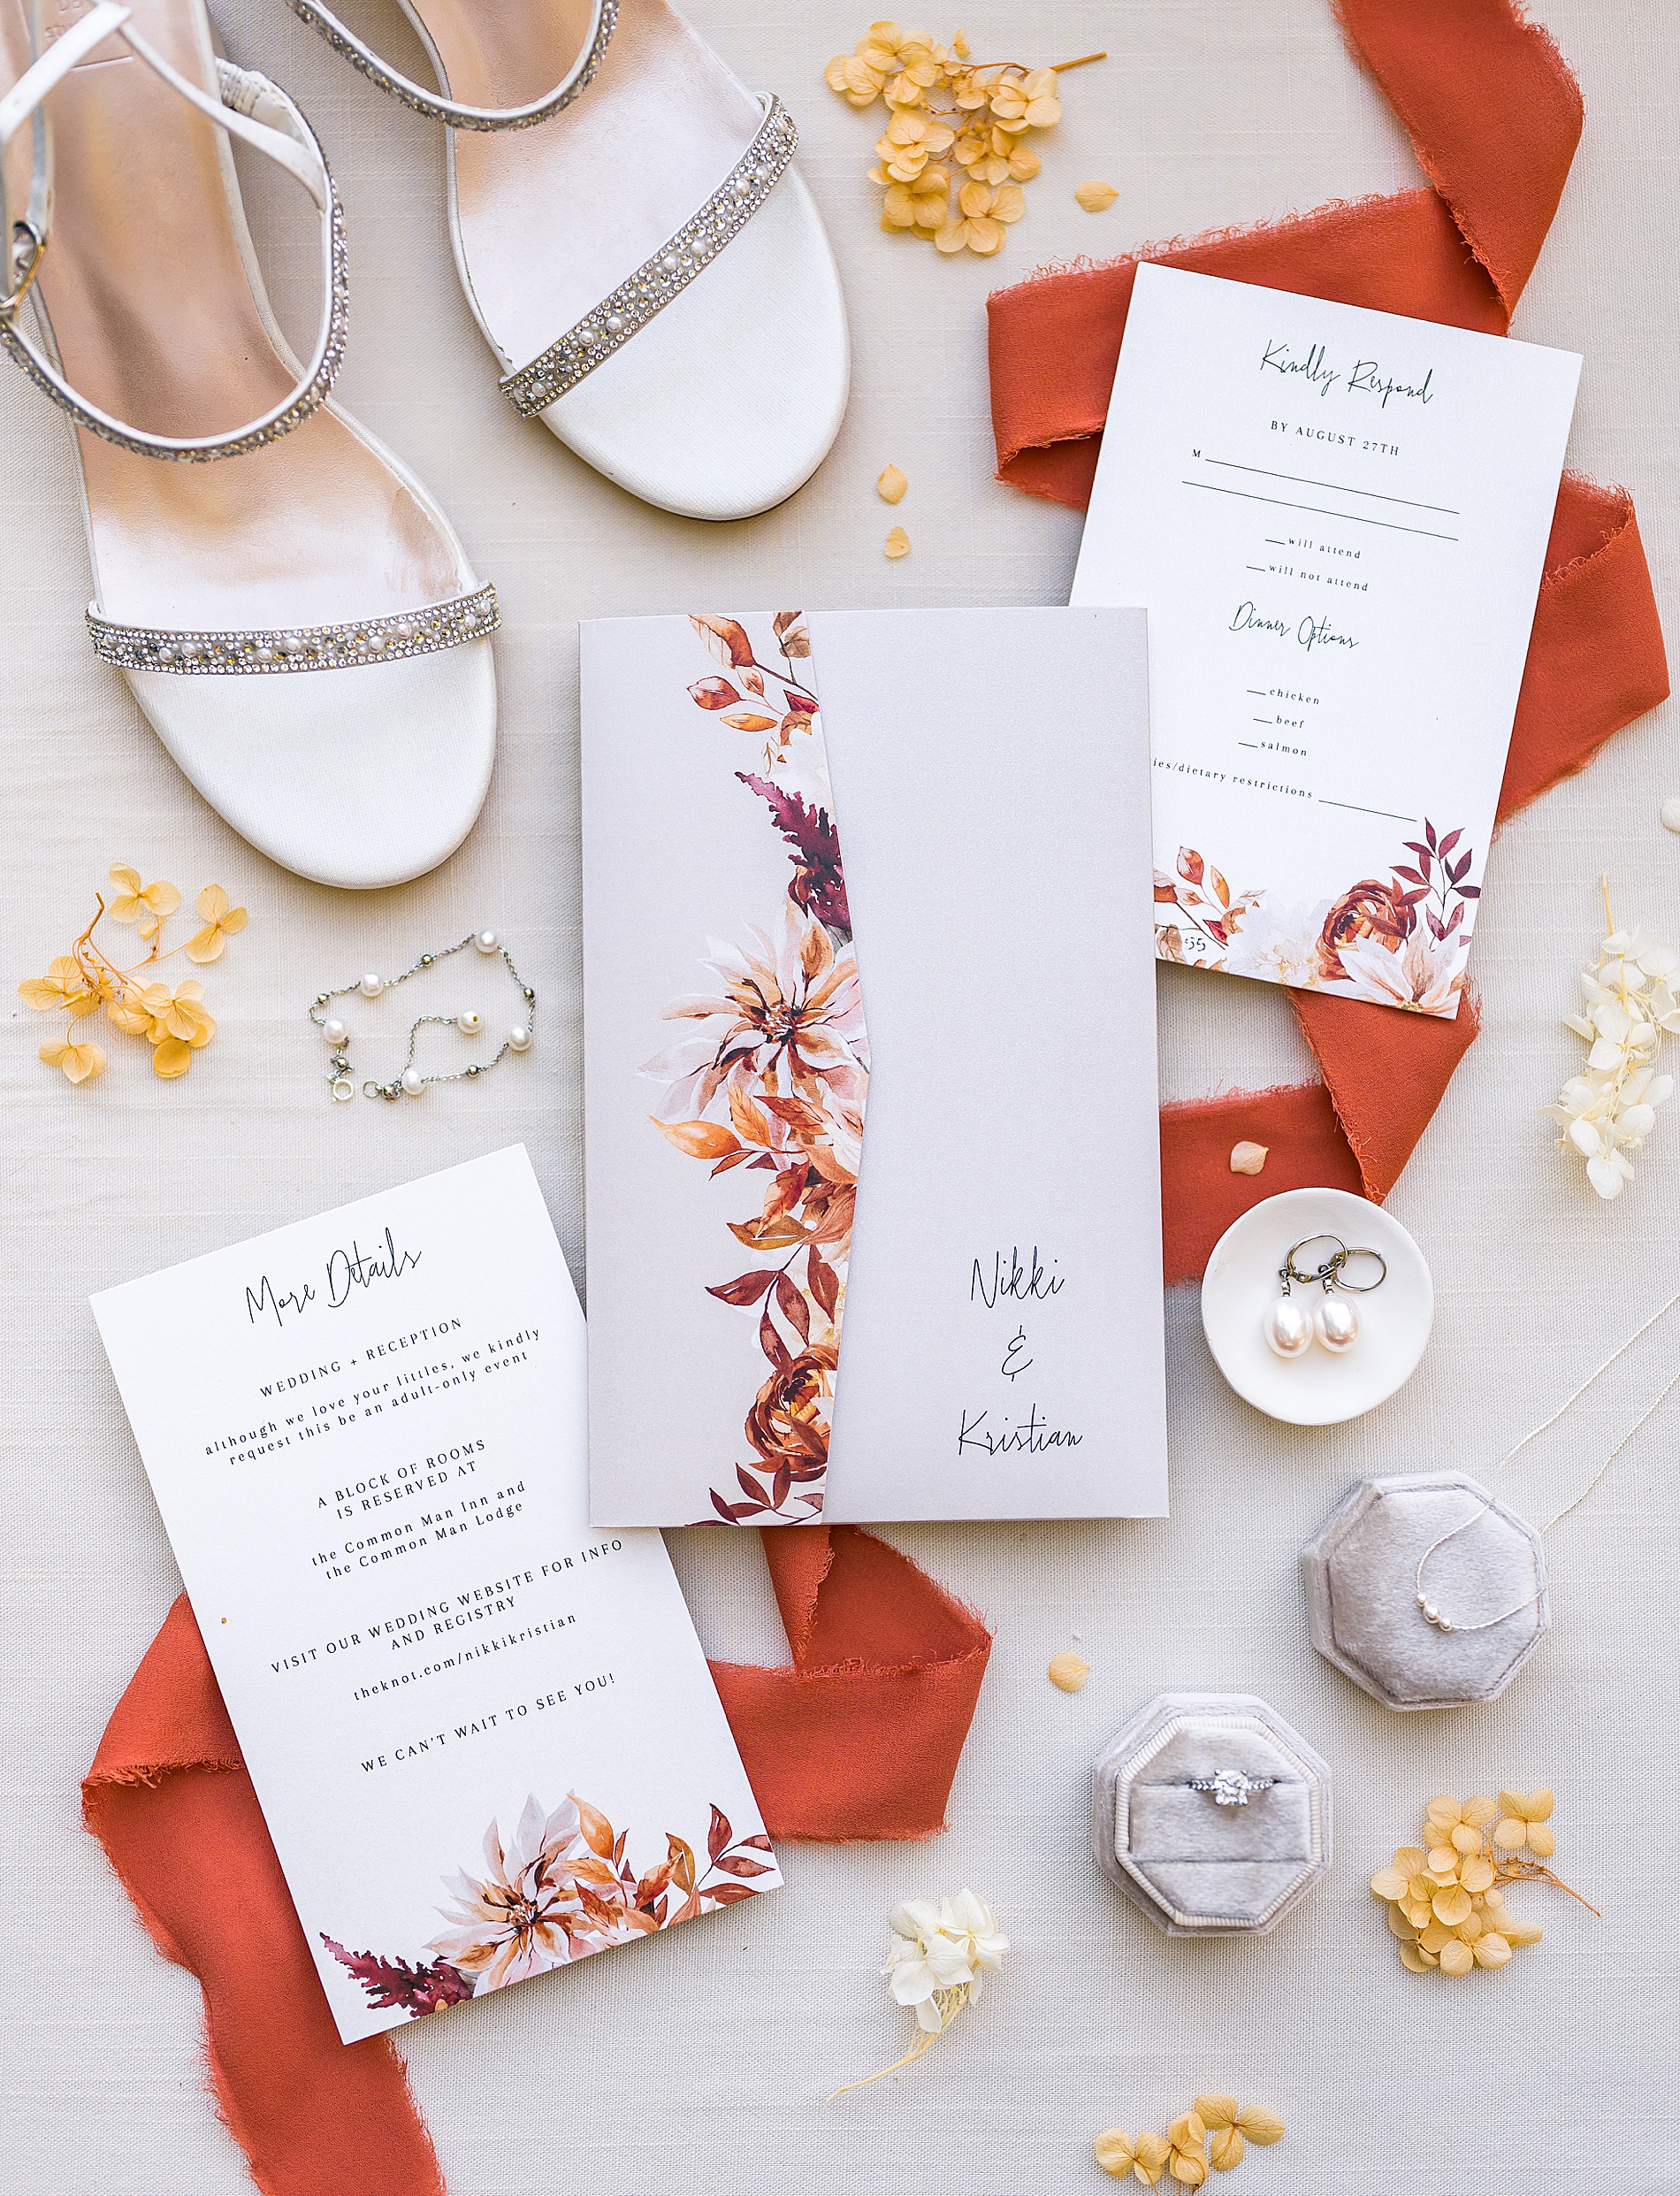 Wedding invitations and details